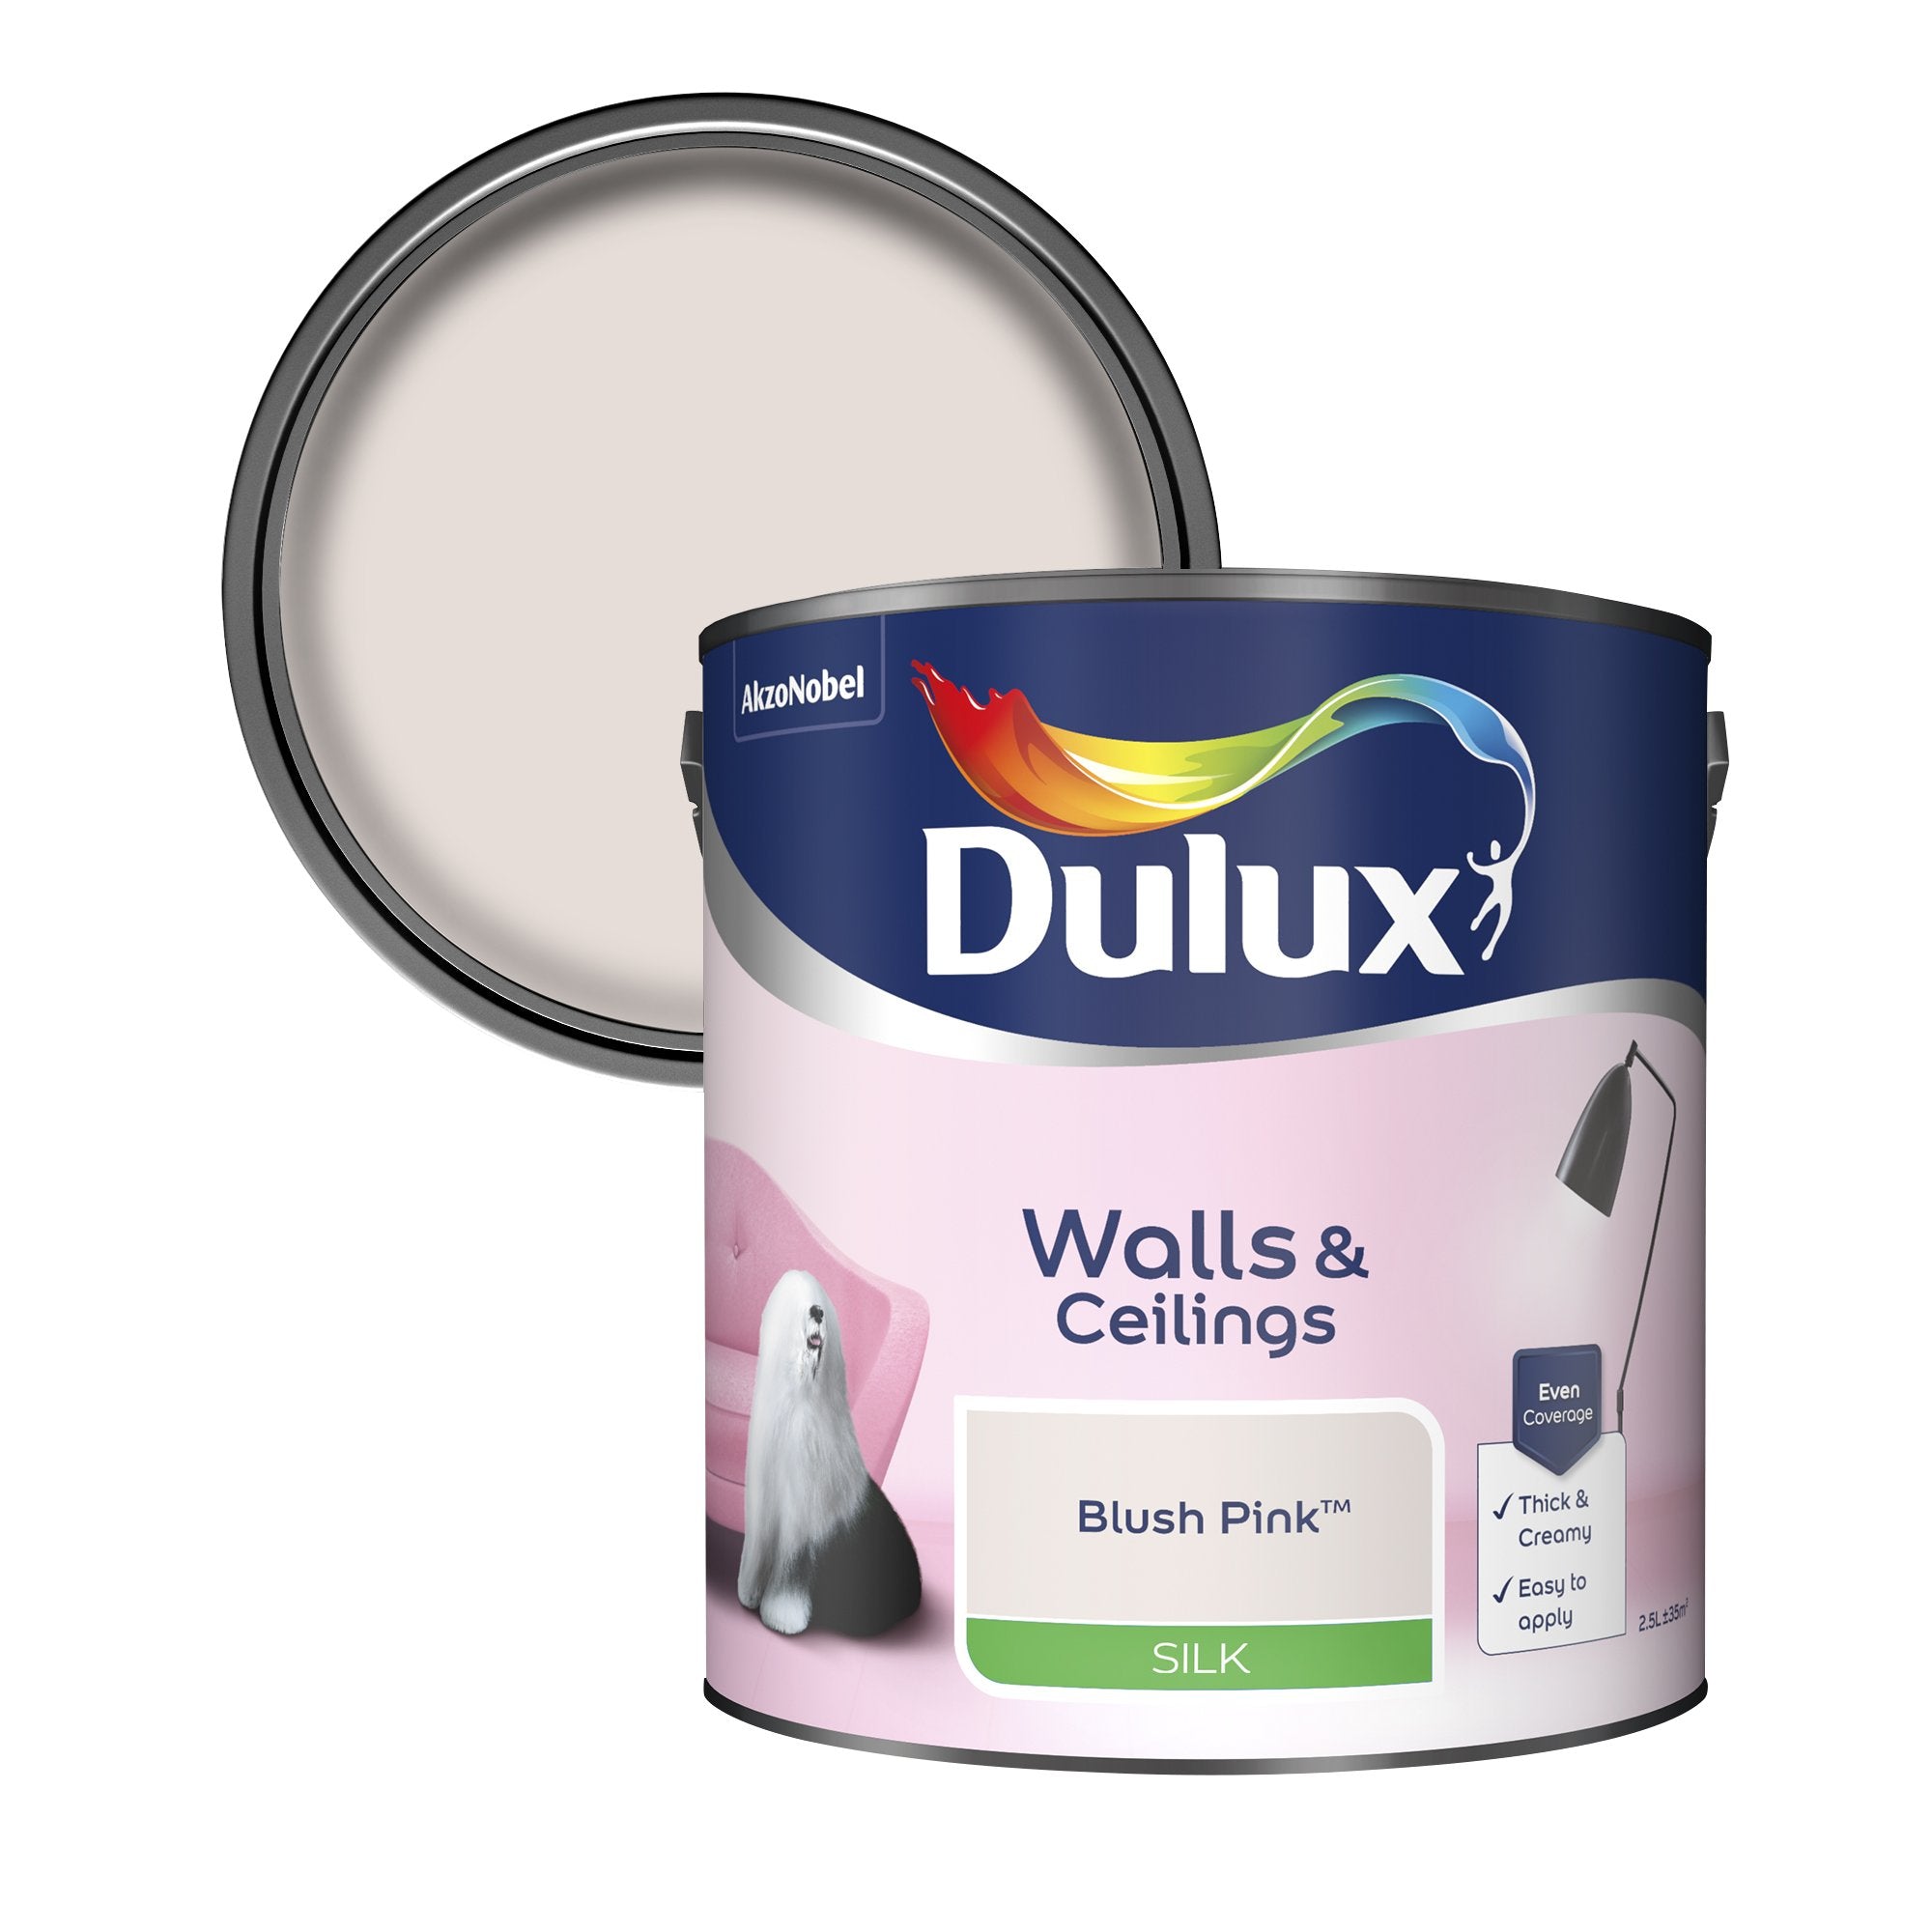 Dulux-Silk-Emulsion-Paint-For-Walls-And-Ceilings-Blush-Pink-2.5L